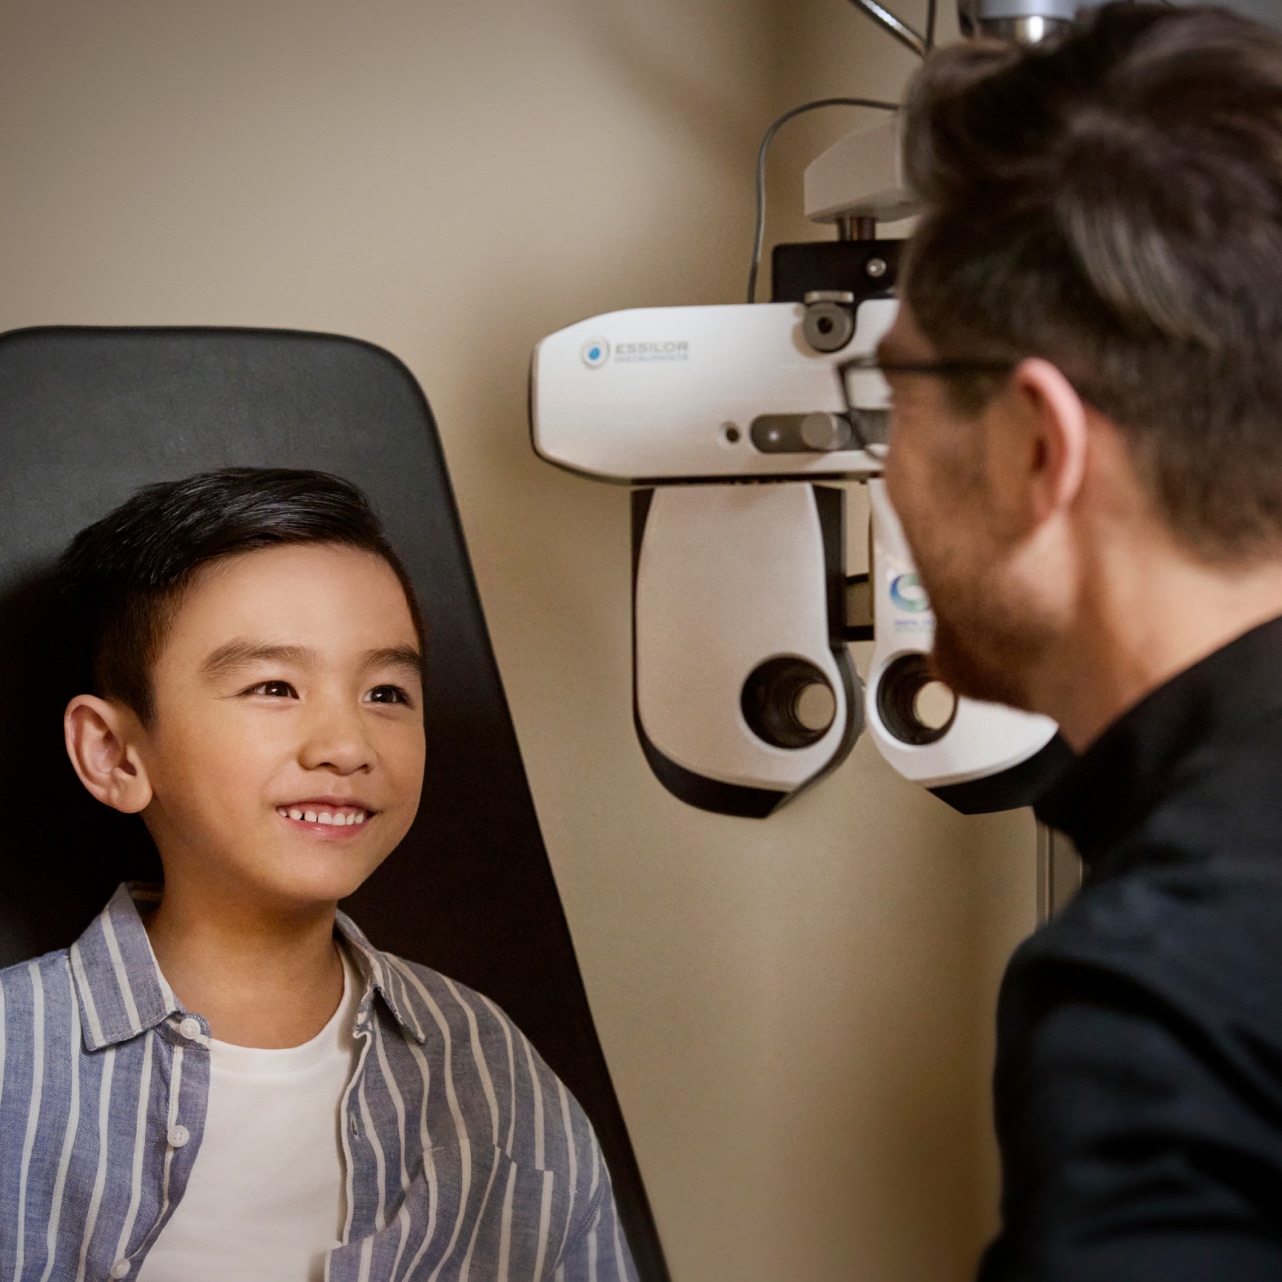 Optometrist working with a child